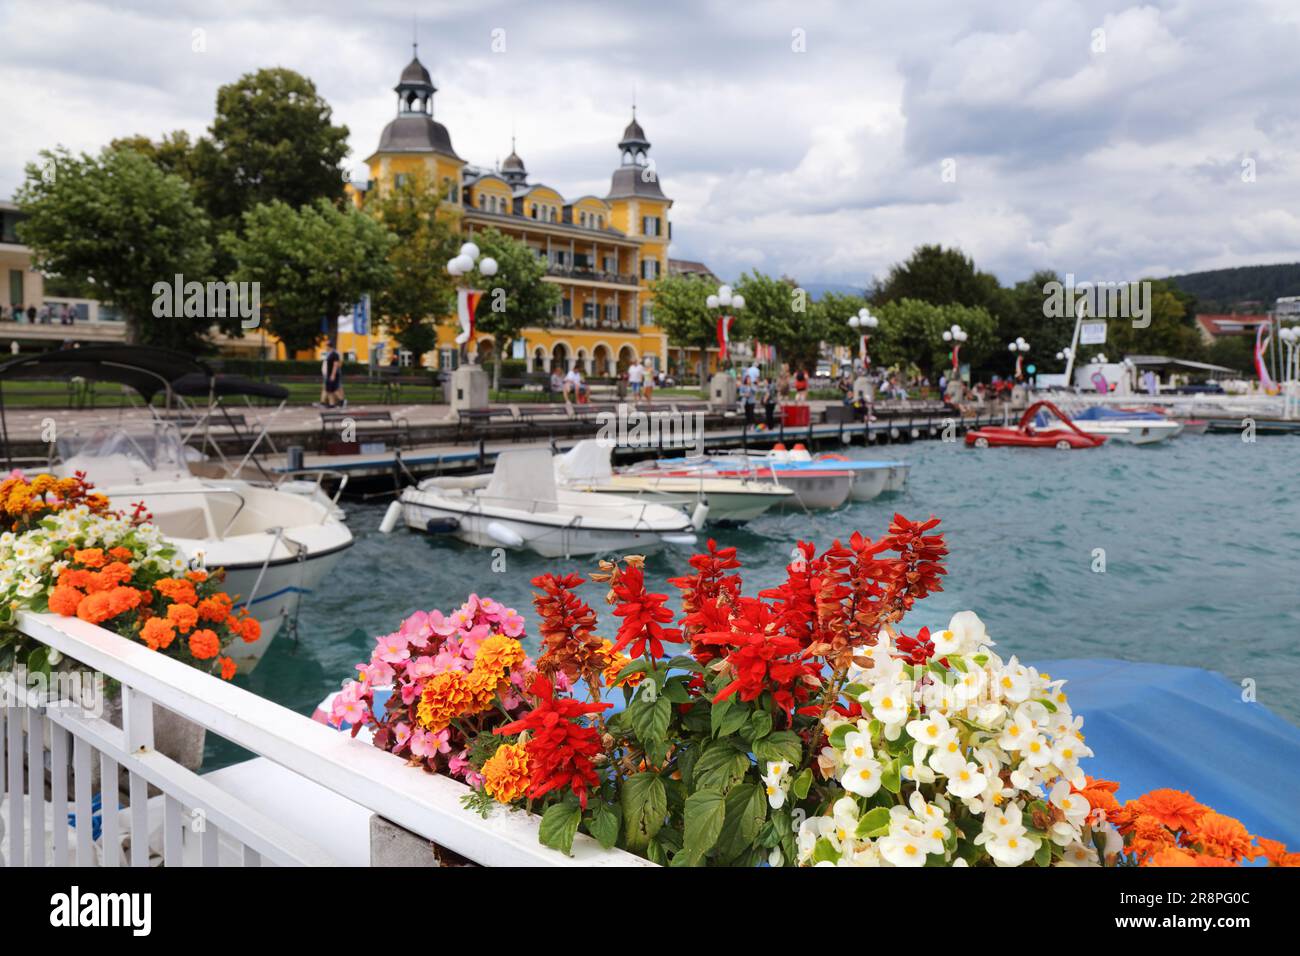 Town flowers in Velden am Worther See in Austria. Mixed species flower pot with marigold, Salvia splendens (scarlet sage) and begonia. Stock Photo